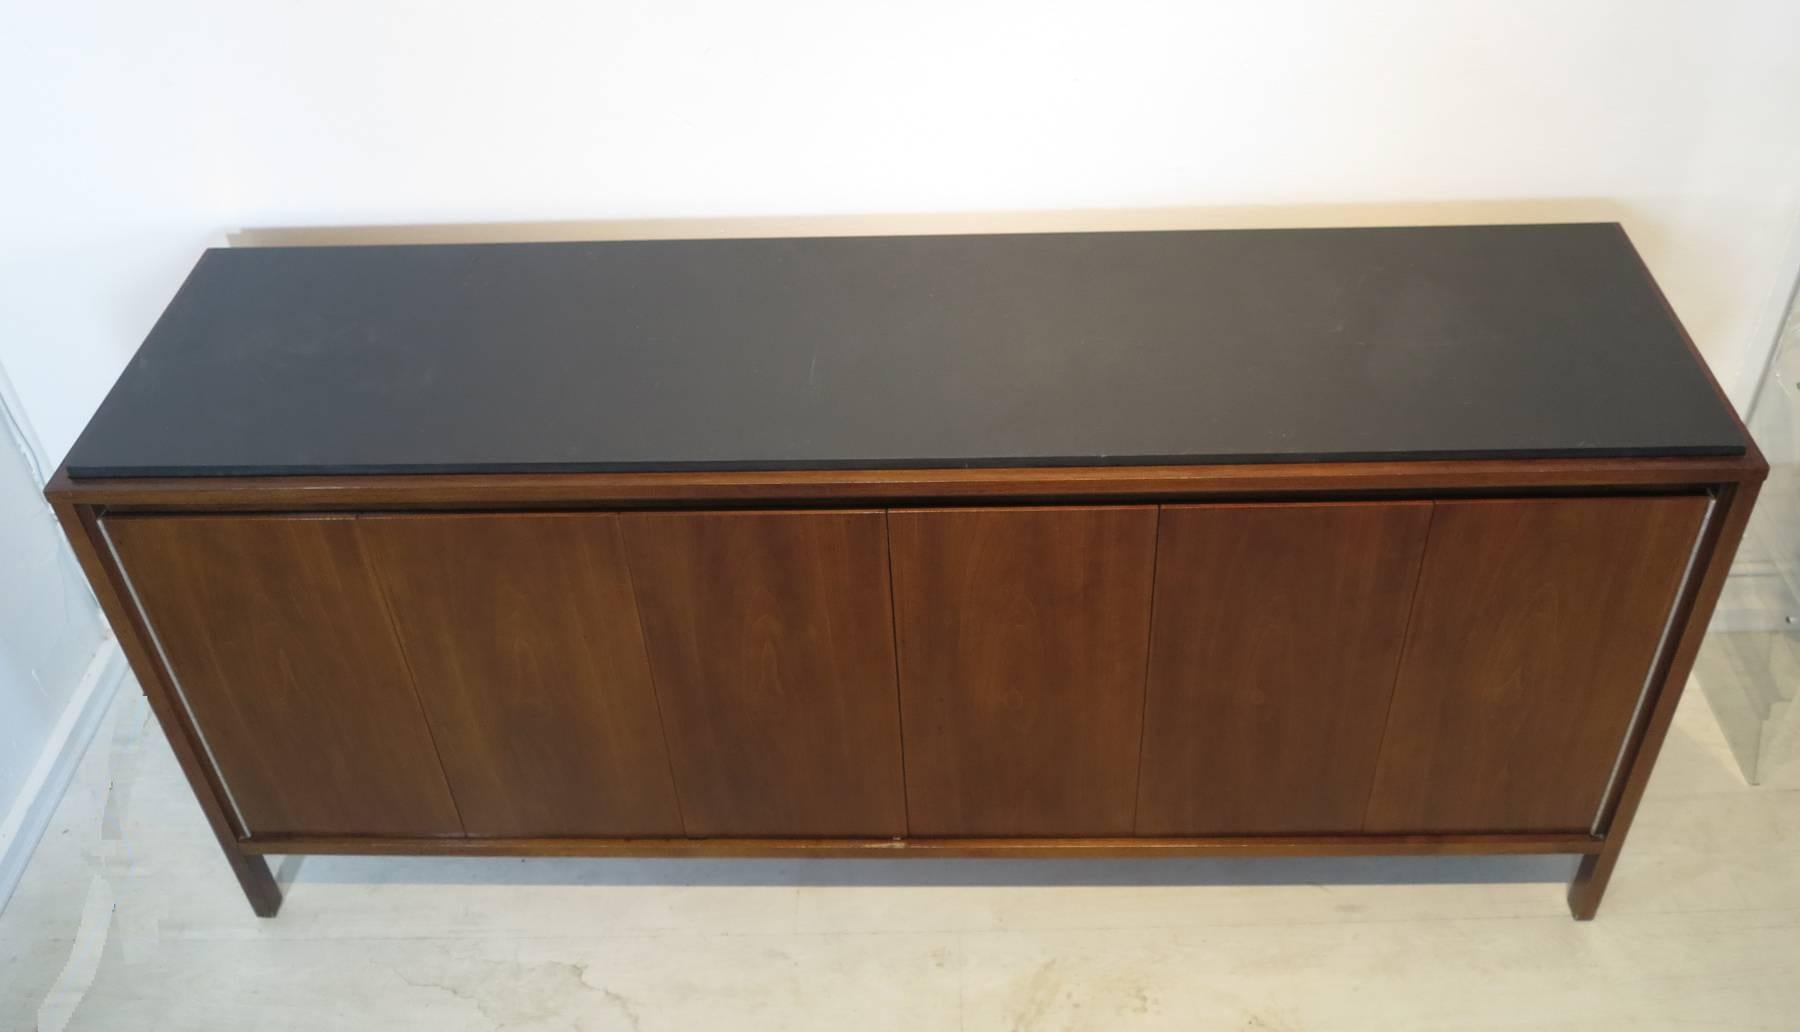 Beautifully designed streamlined modernist cabinet by Paul McCobb for H. Sacks & Sons Connoisseur collection. This elegantly crafted work has six (6) richly grained book matched walnut doors with no exposed hardware that open to reveal two (2) large